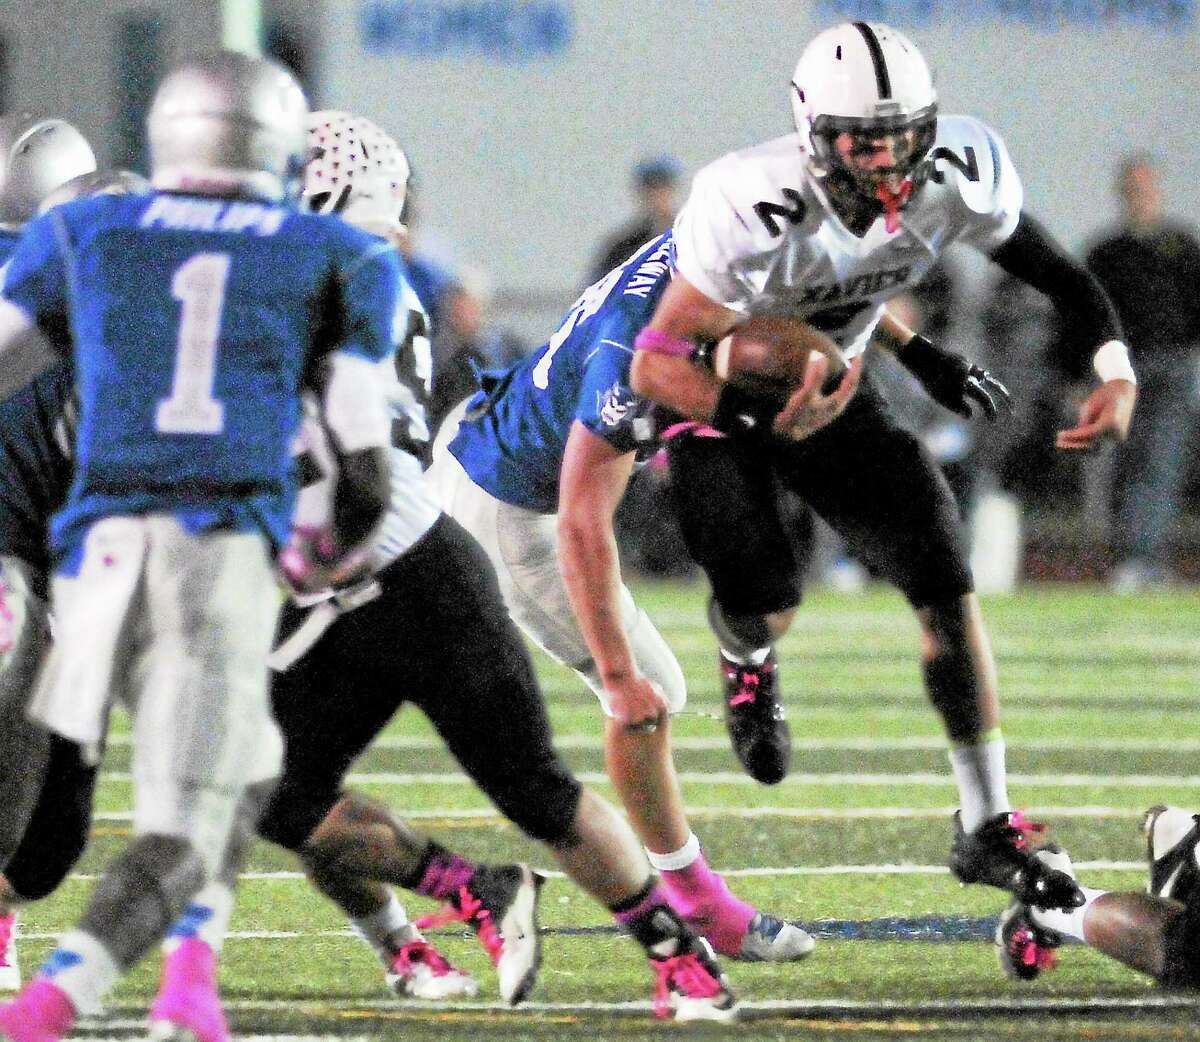 (Peter Hvizdak — Register)Xavier Quarterback Joseph Carbone breaks through the hole for a gain against West Haven H.S.during first quarter football action at West Haven High School Friday evening October 18, 2013.